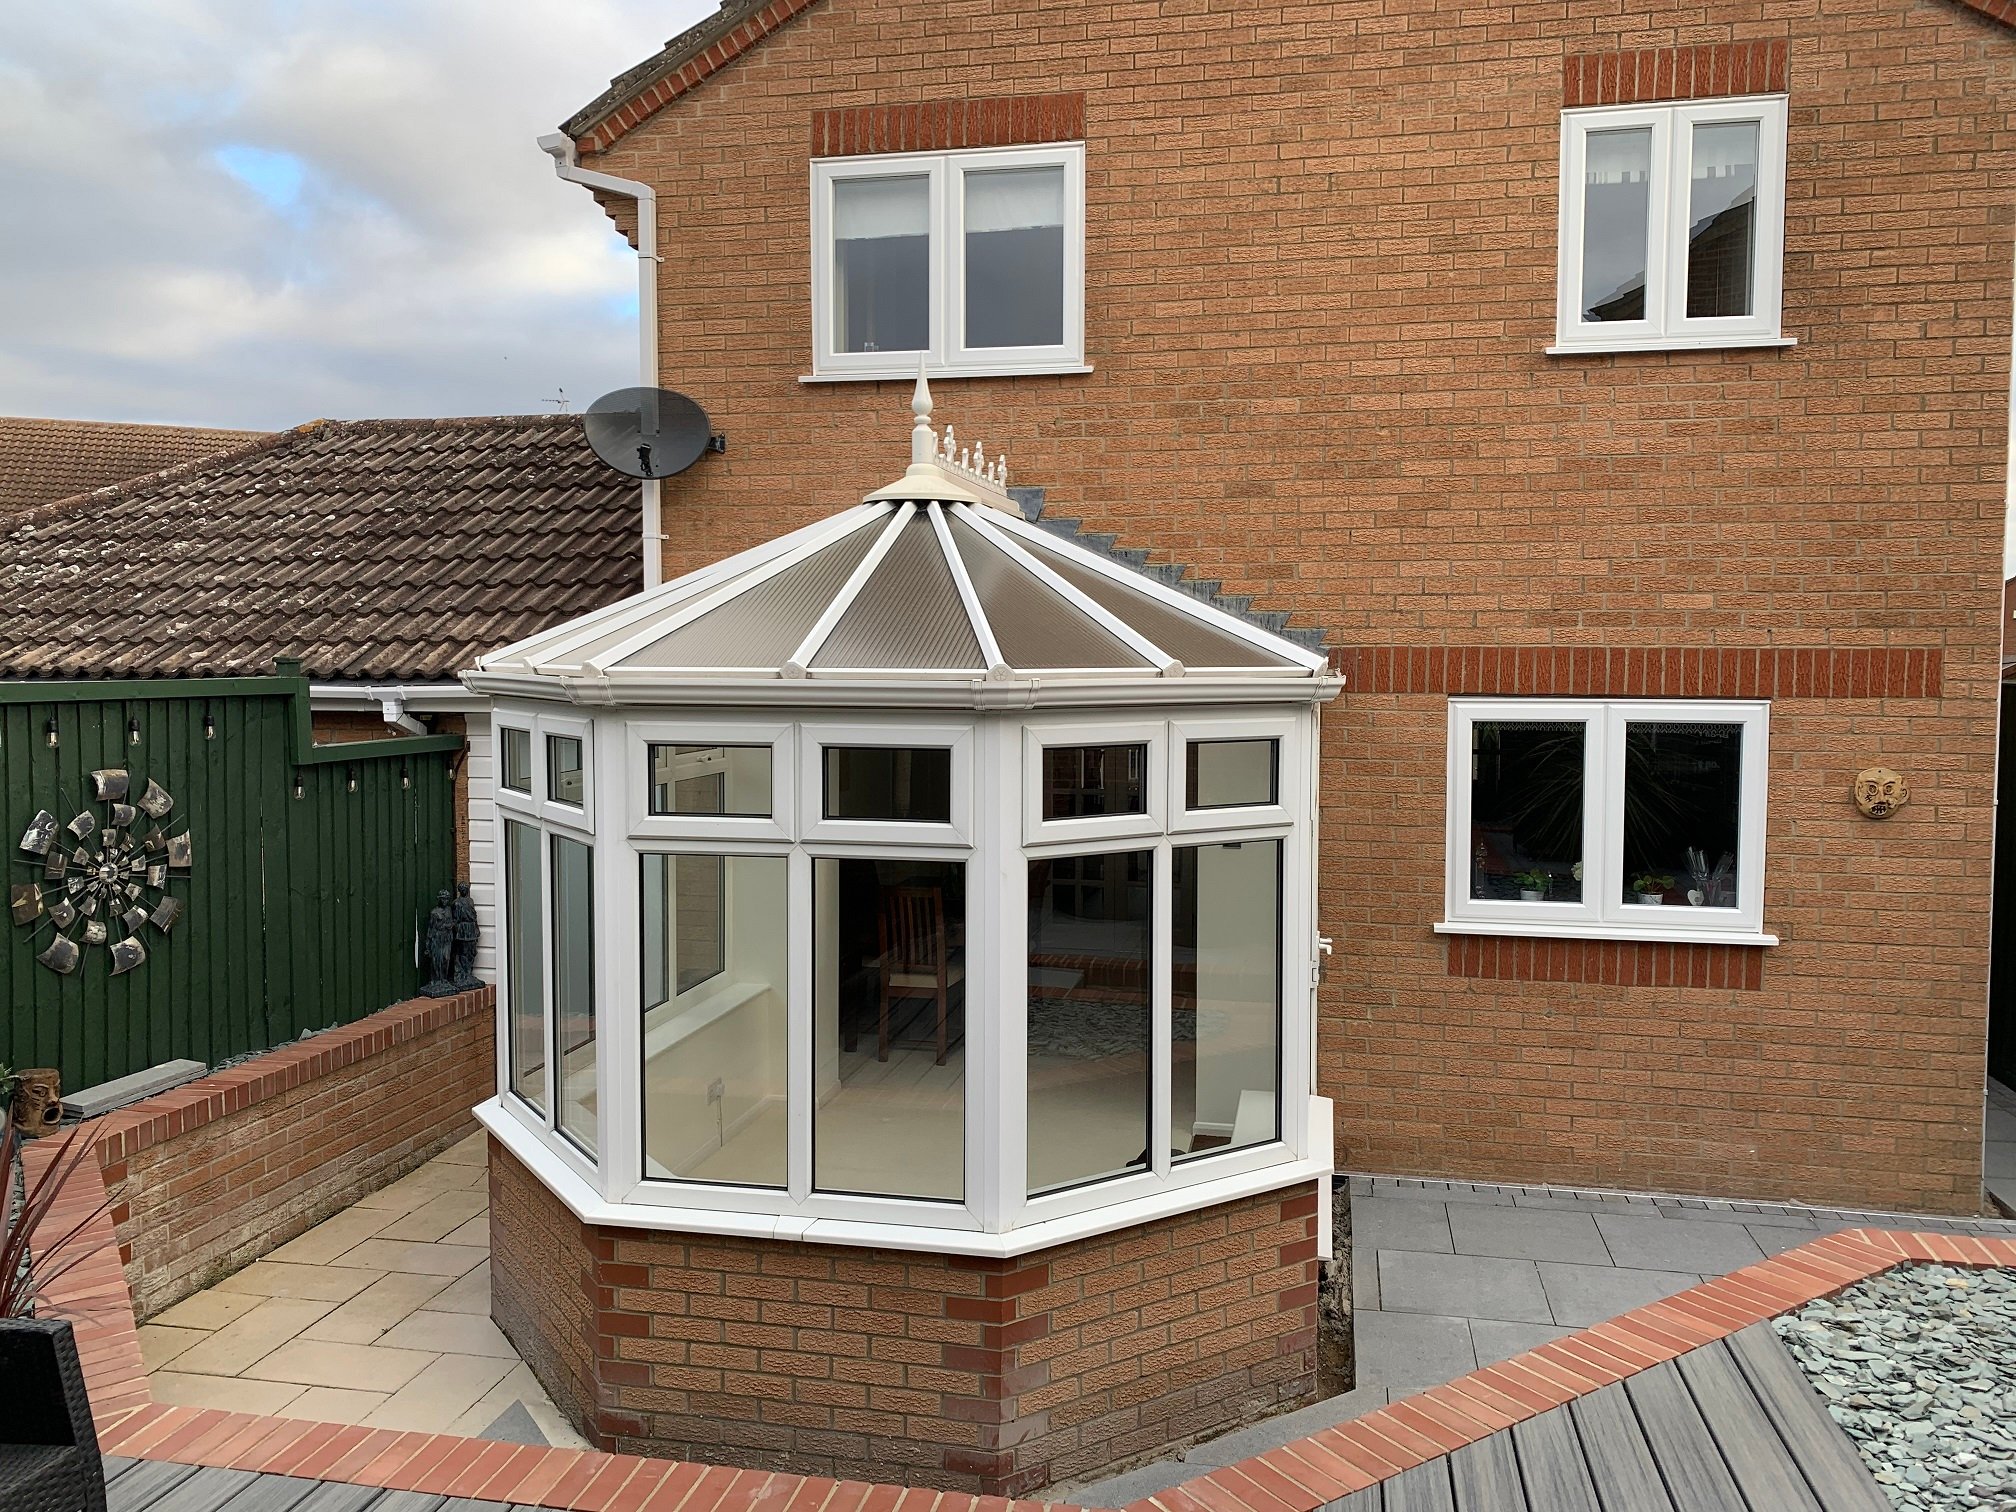 Conservatory in Cambridgeshire before a Conservatory Roof Conversion